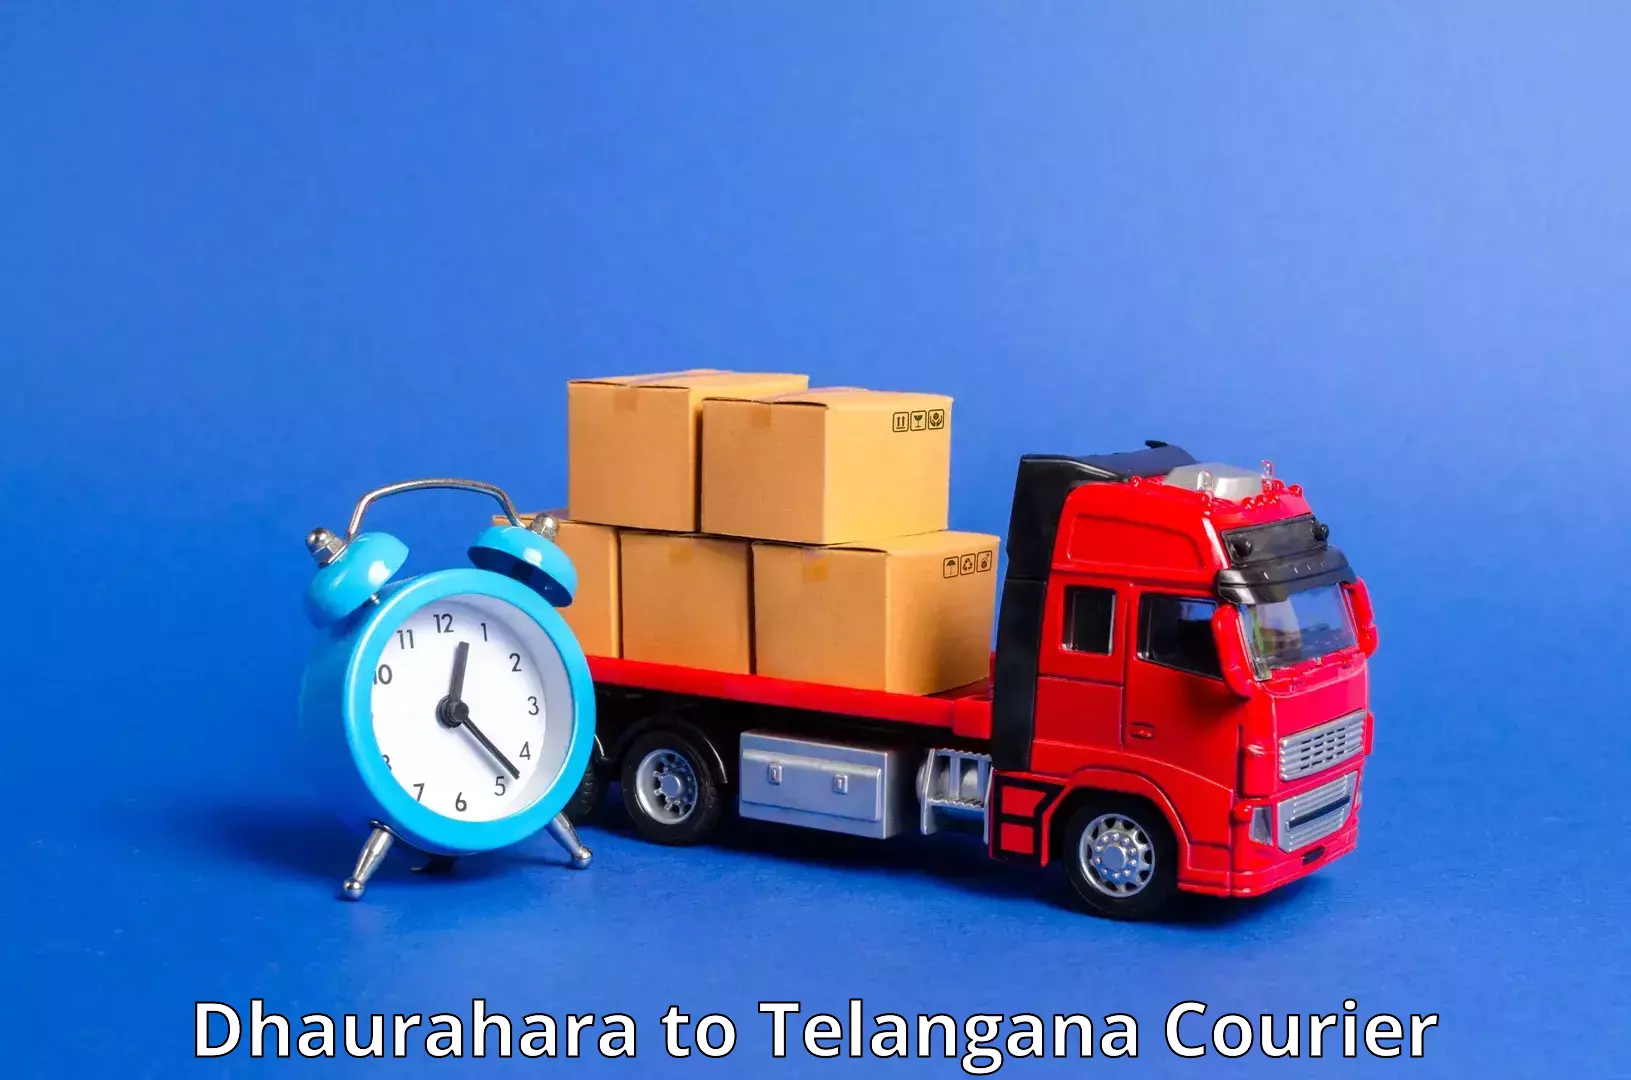 Affordable parcel service Dhaurahara to Narmetta